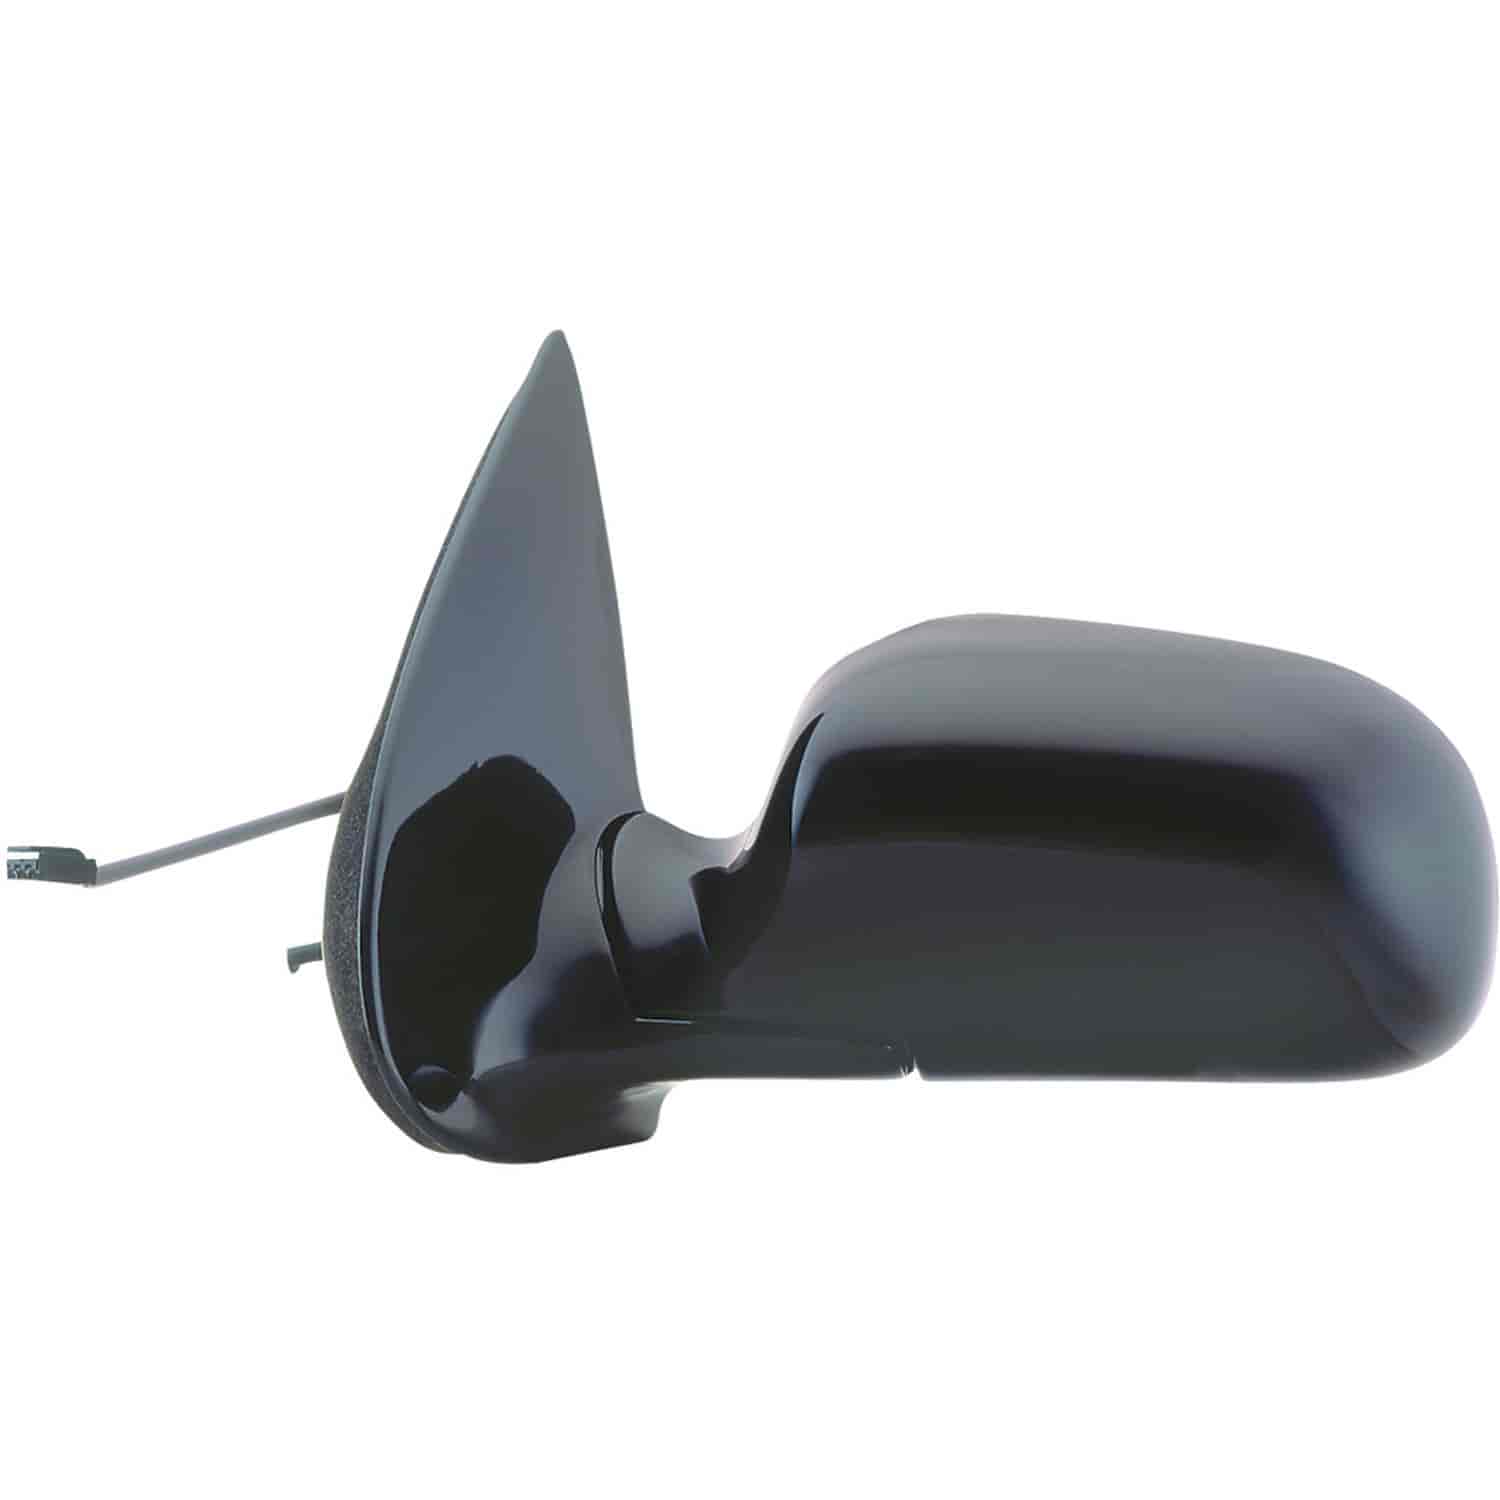 OEM Style Replacement mirror for 97-98 Ford Windstar driver side mirror tested to fit and function l